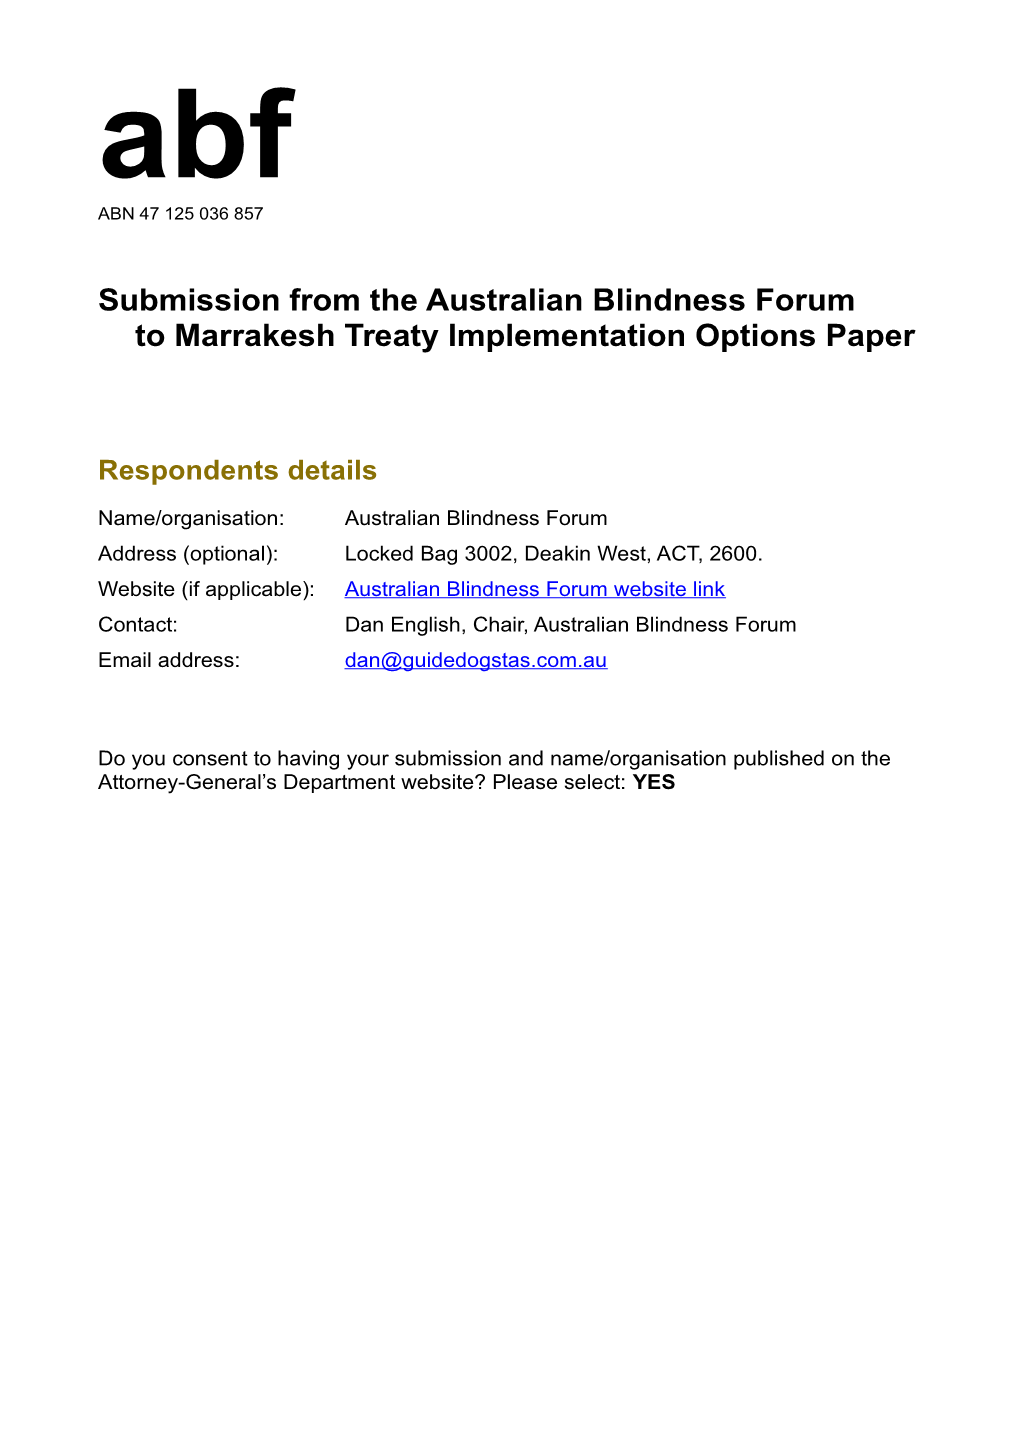 Australian Blindness Forum - Submission to Marrakesh Treaty Implementation Options Paper